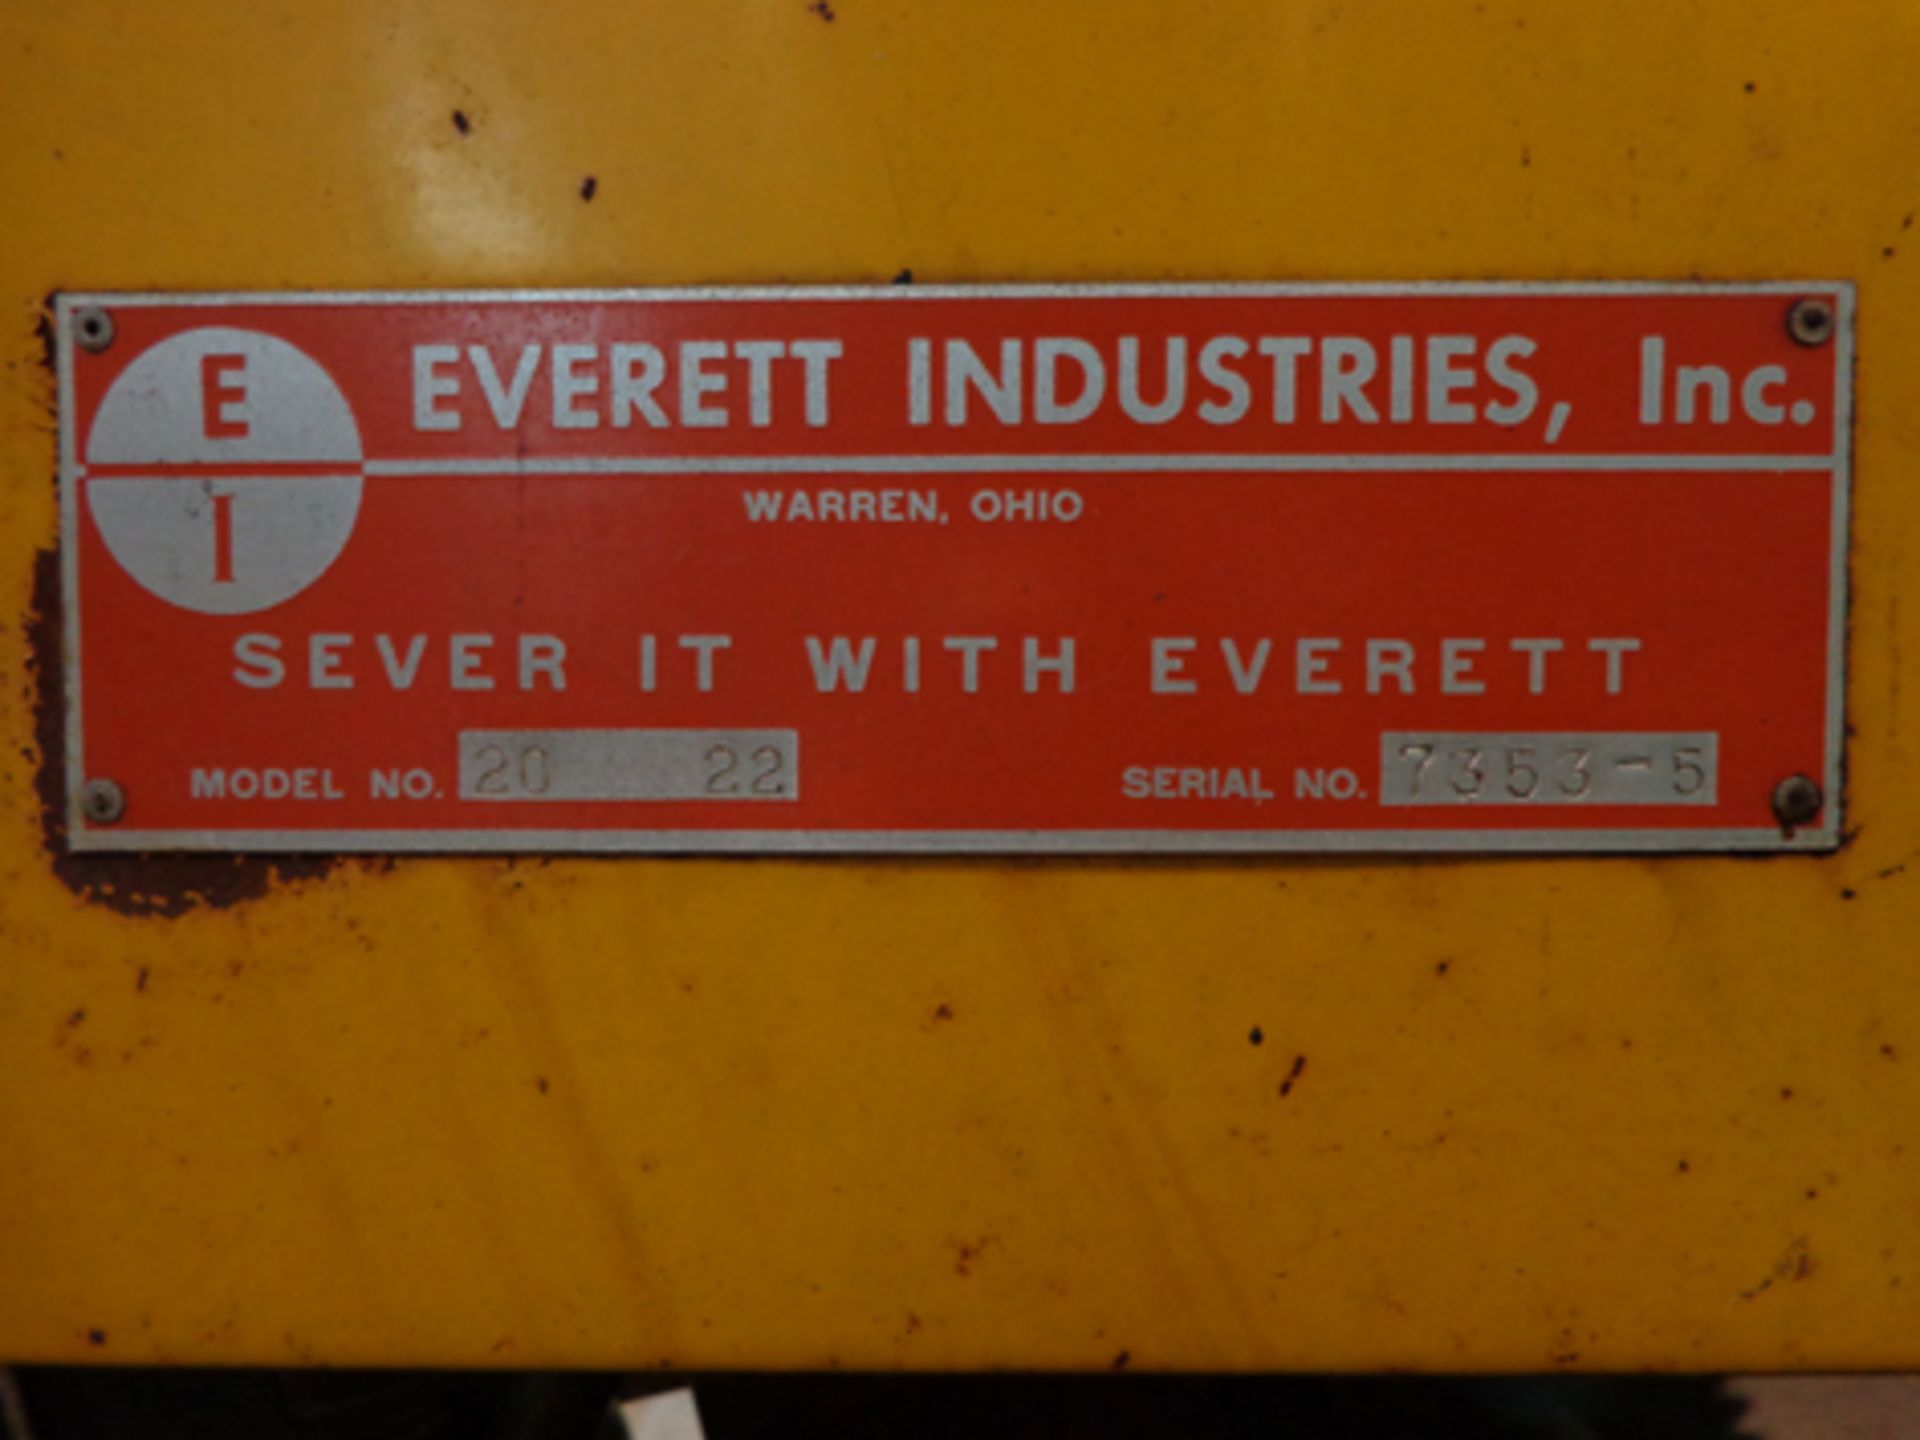 Everett Cold Saw / Model: 2022 / SN: 7353-5 / Capacity: 20" / Hydraulic Feed Control / 3 Phase - Image 4 of 4